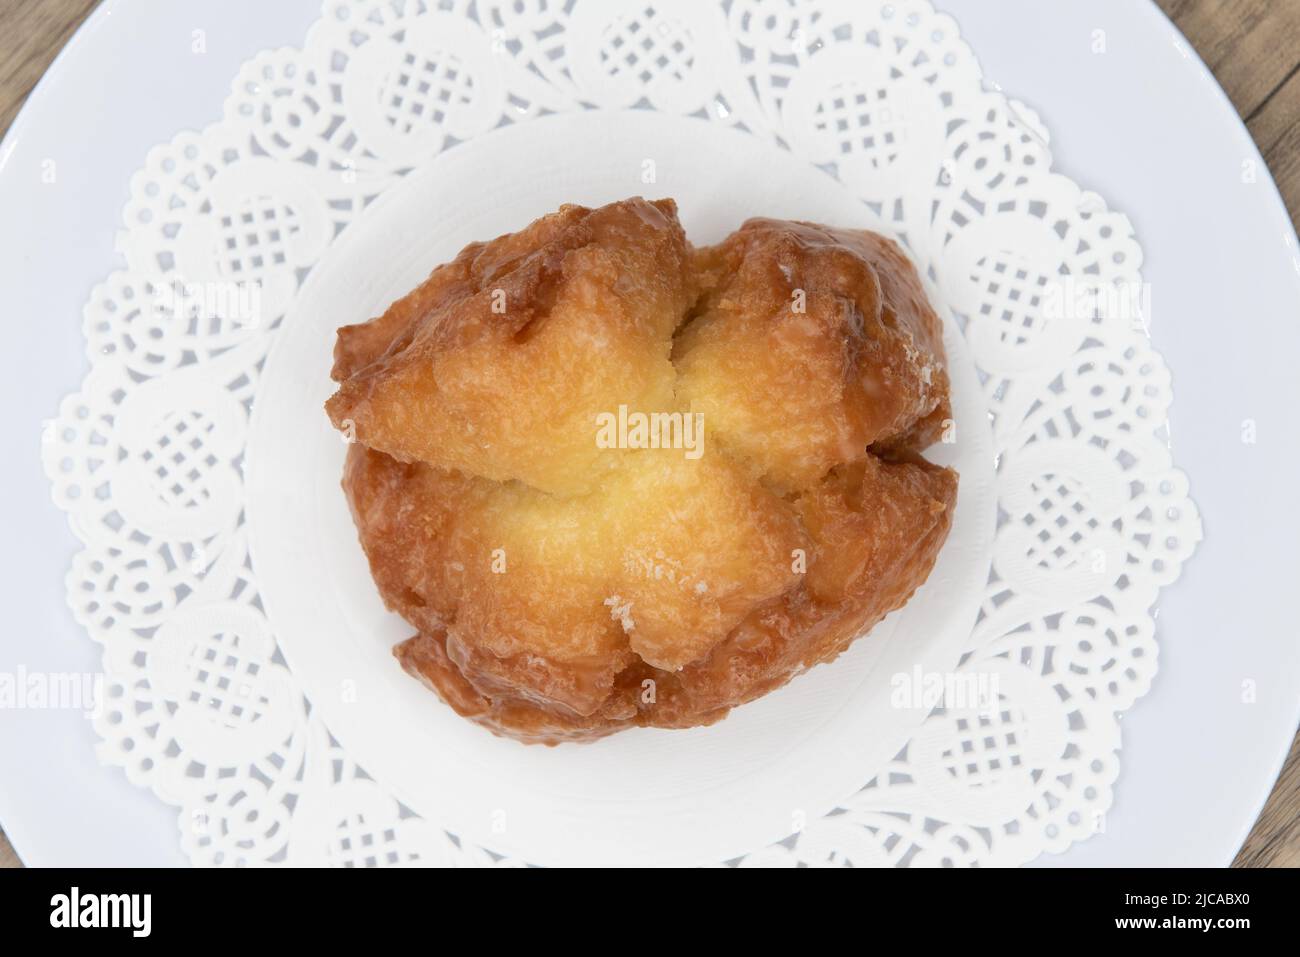 Overhead view of tempting fresh from the oven buttermilk bar donut from the bakery served on a plate. Stock Photo